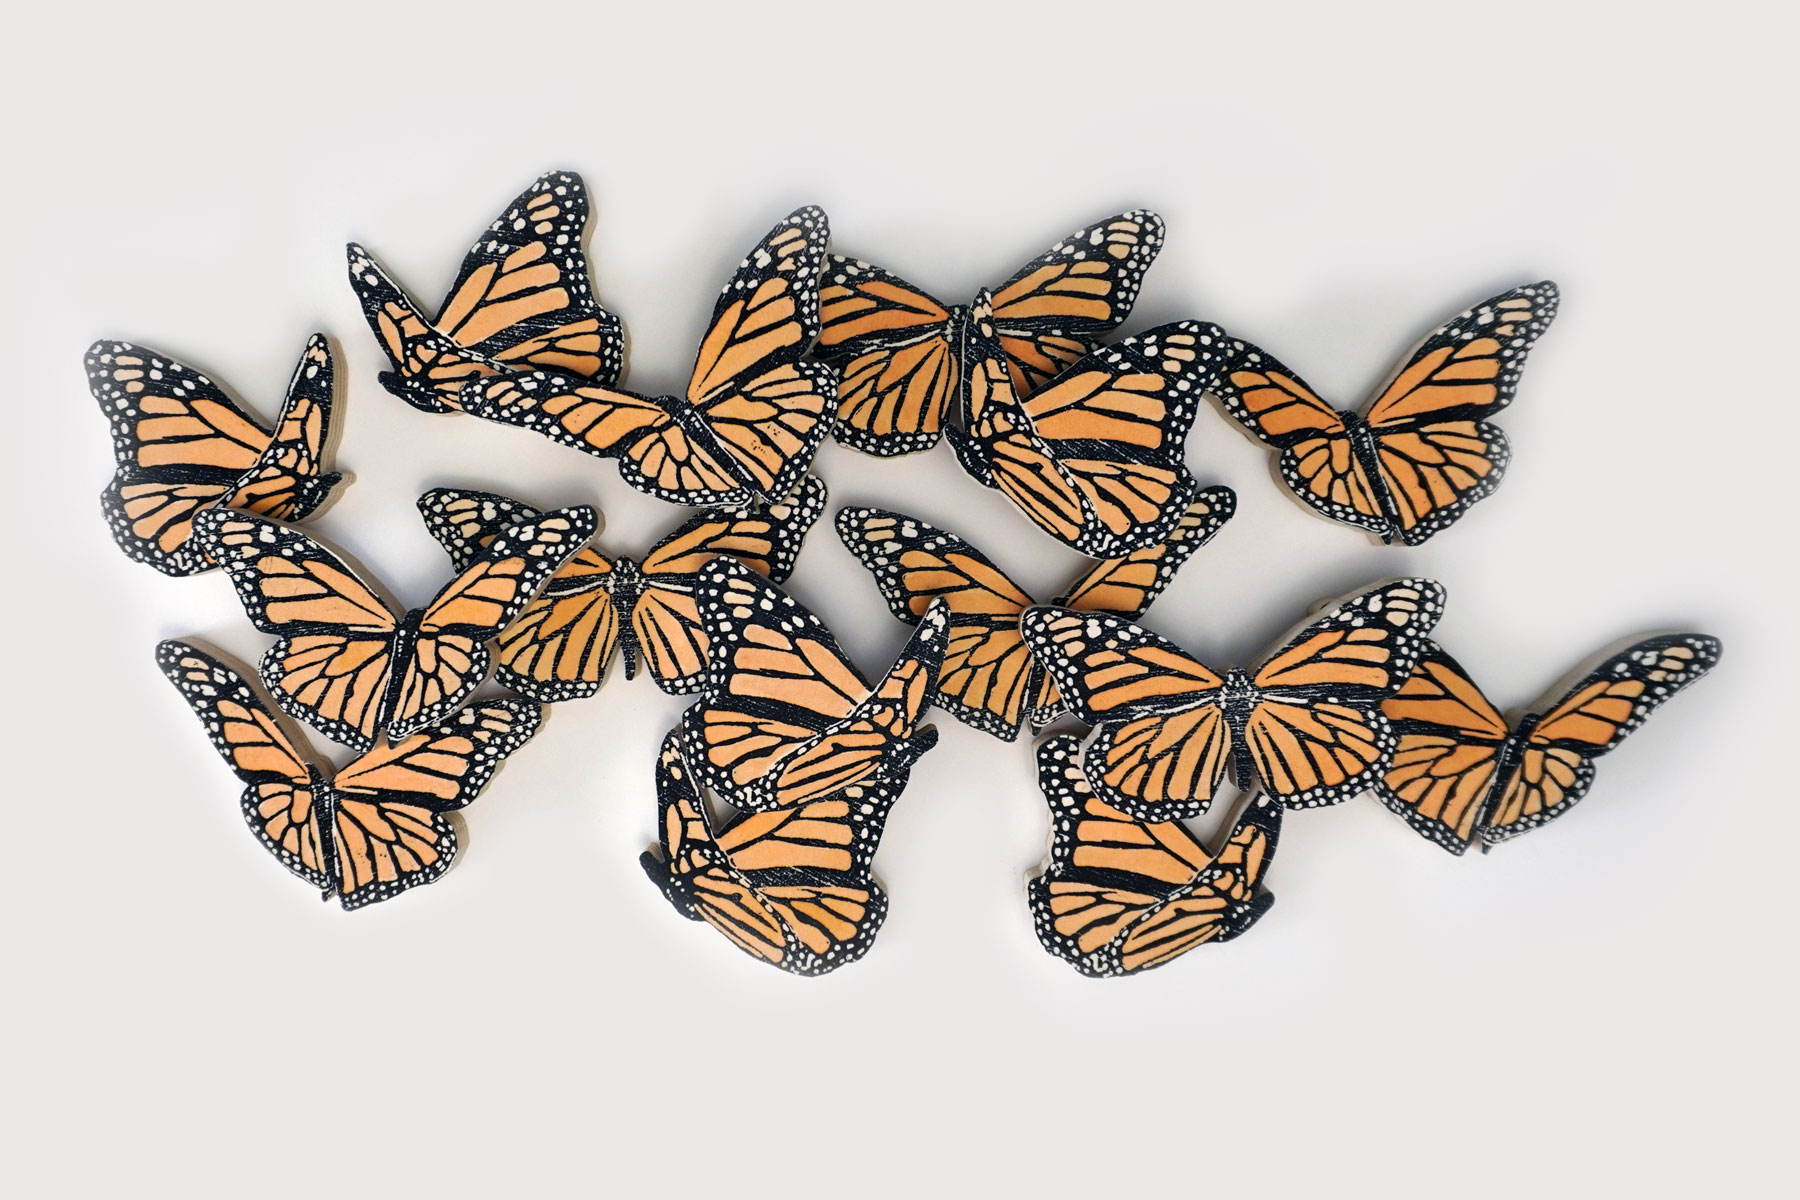 made out of woodcut prints and mix media, a small installation of 15 monarch butterflies in a cluster